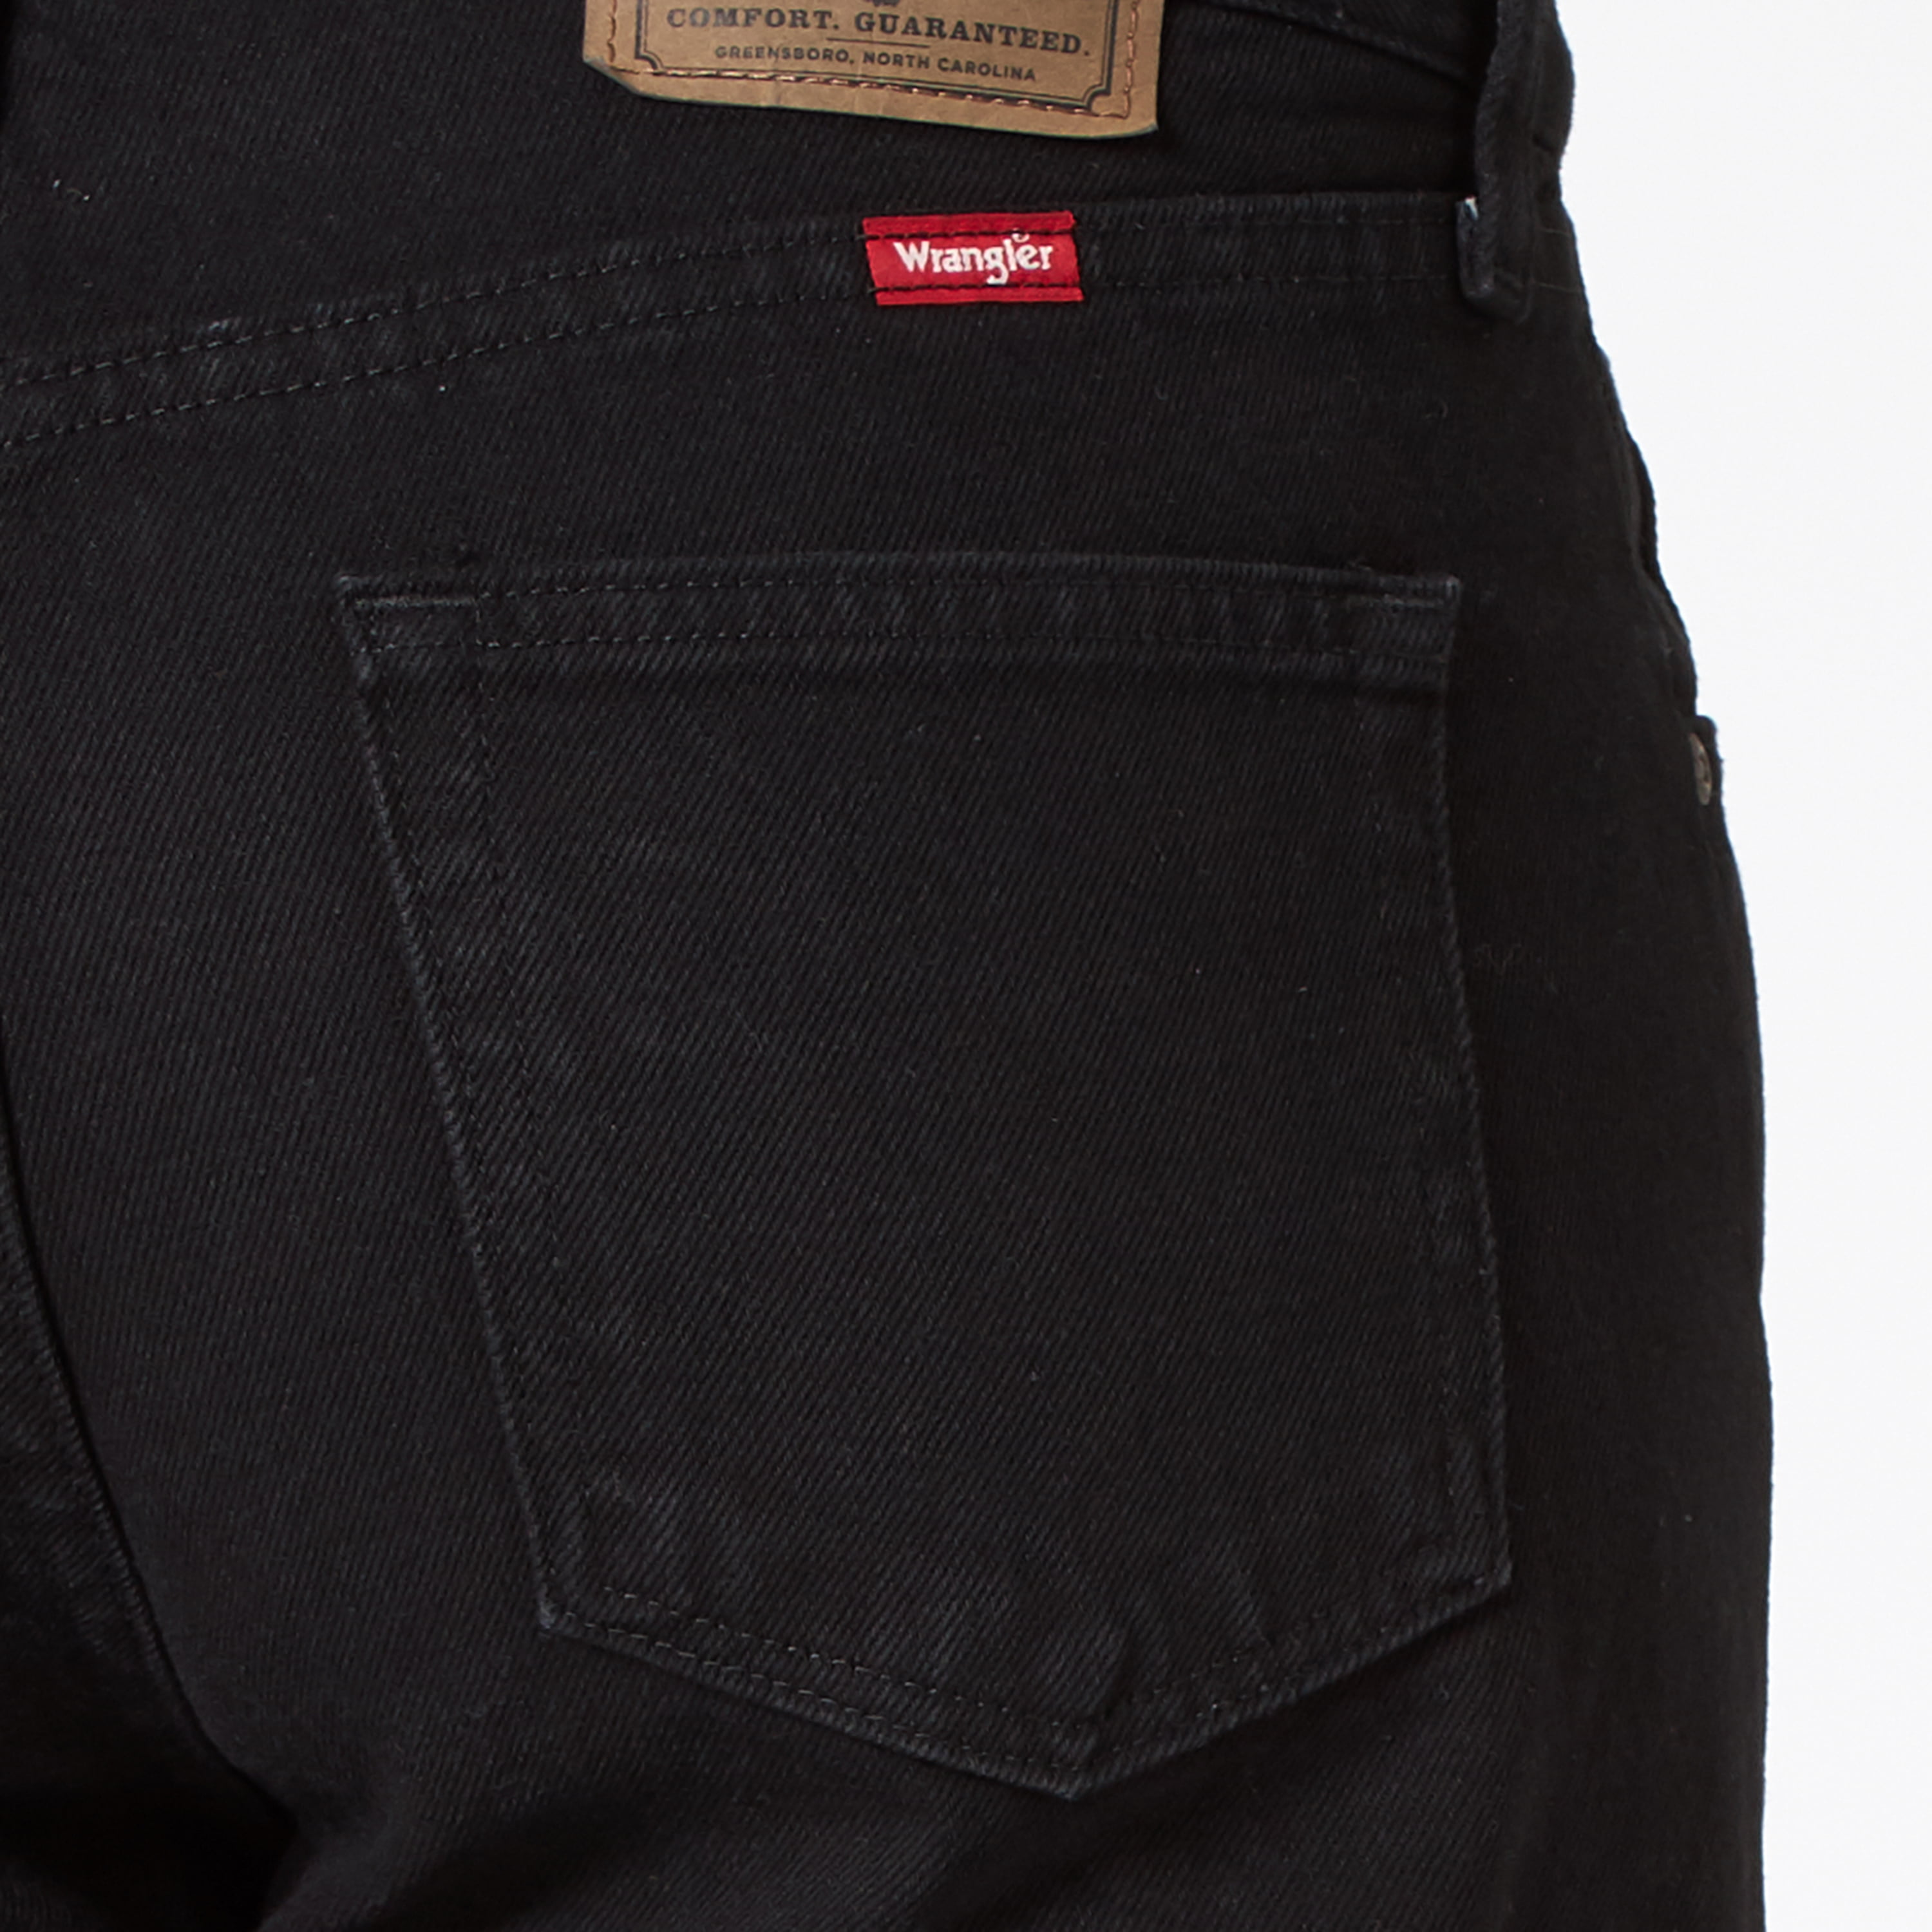 Wrangler Men's and Big Men's Relaxed Fit Jeans 